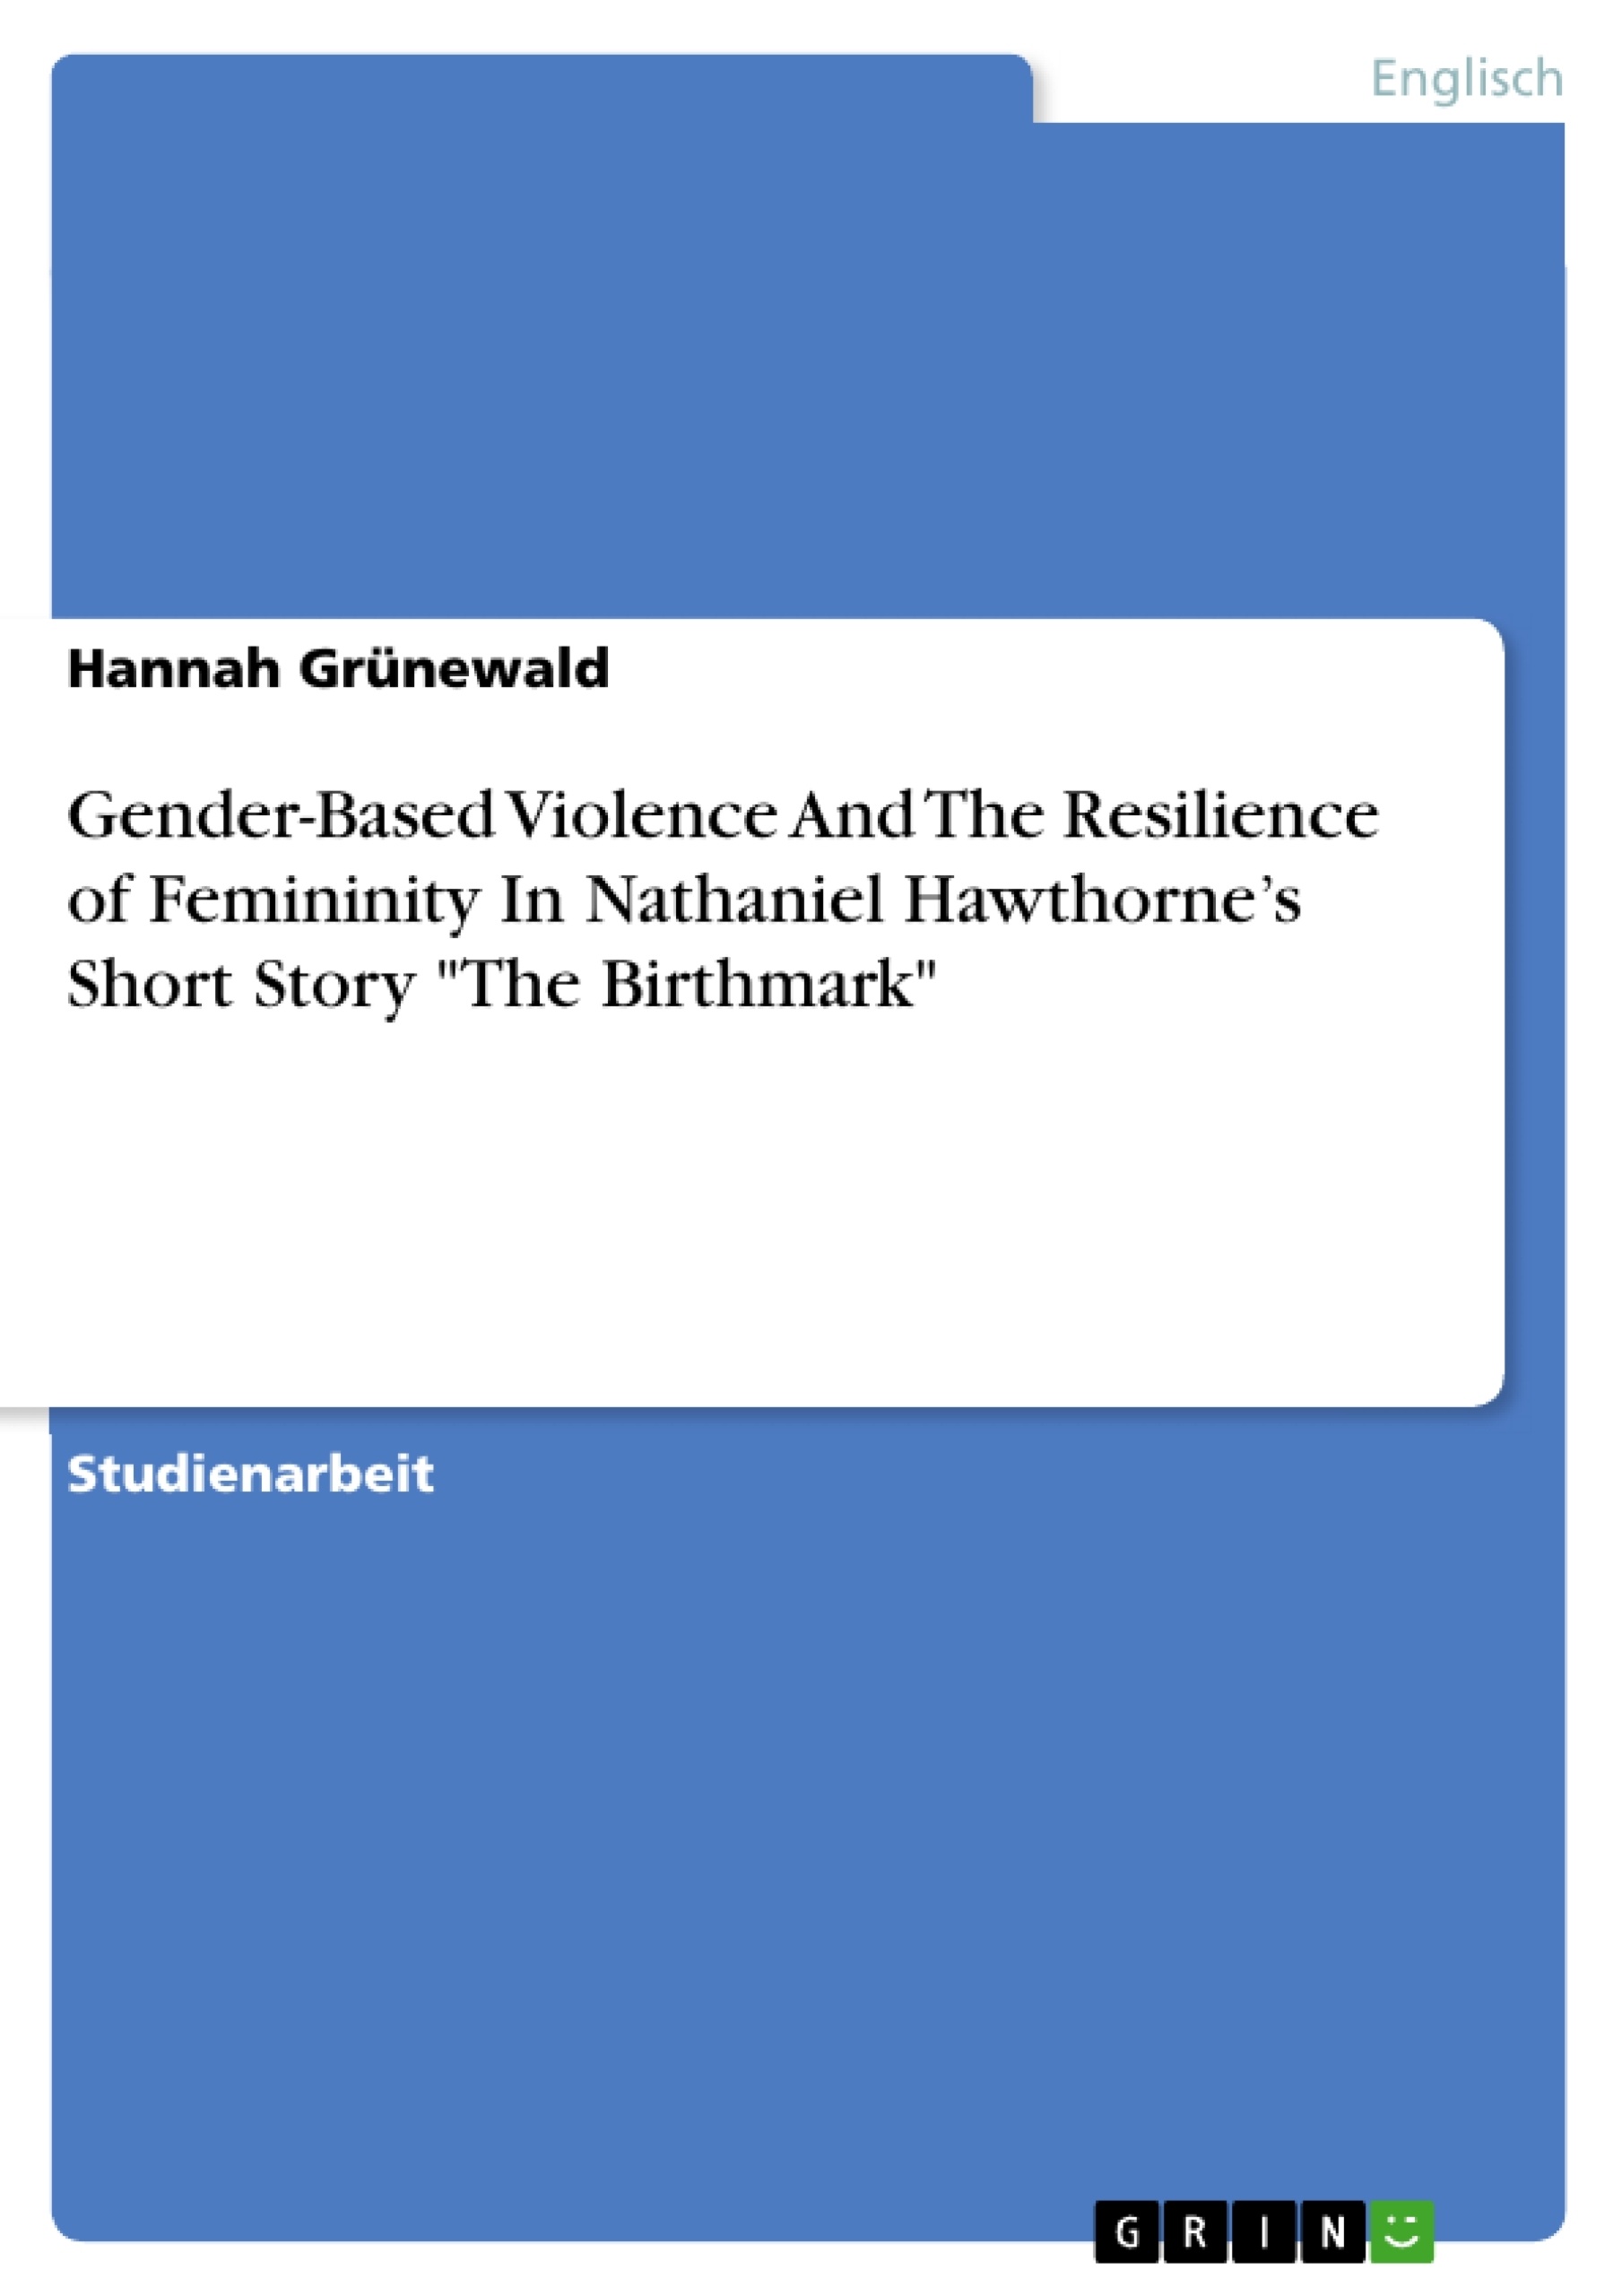 Titel: Gender-Based Violence And The Resilience of Femininity In Nathaniel Hawthorne’s Short Story "The Birthmark"